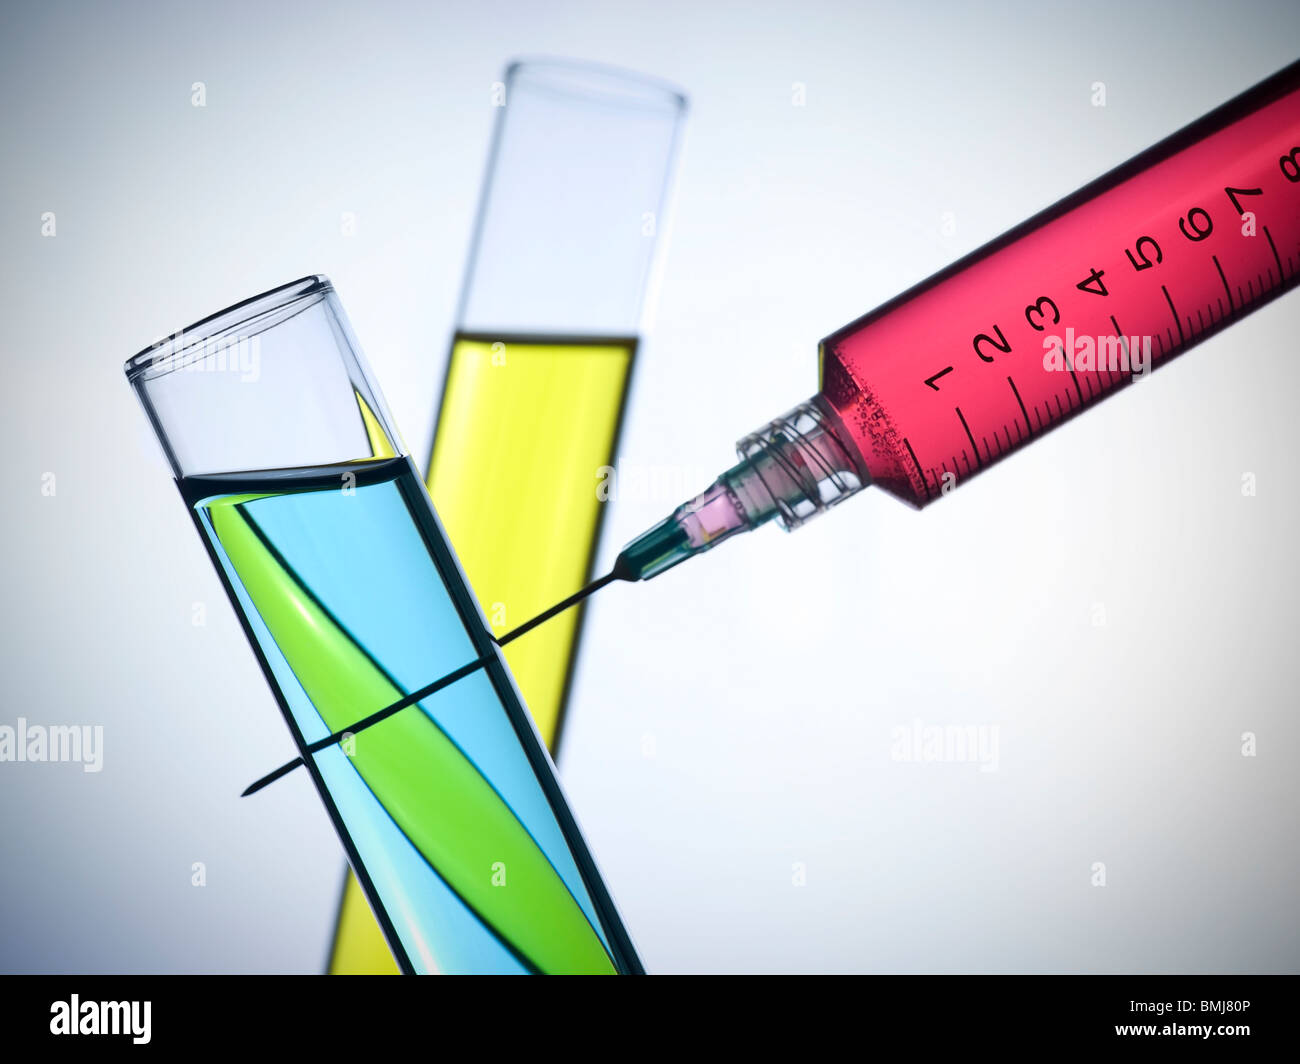 A syringe and two test tubes filled with color liquids. Stock Photo